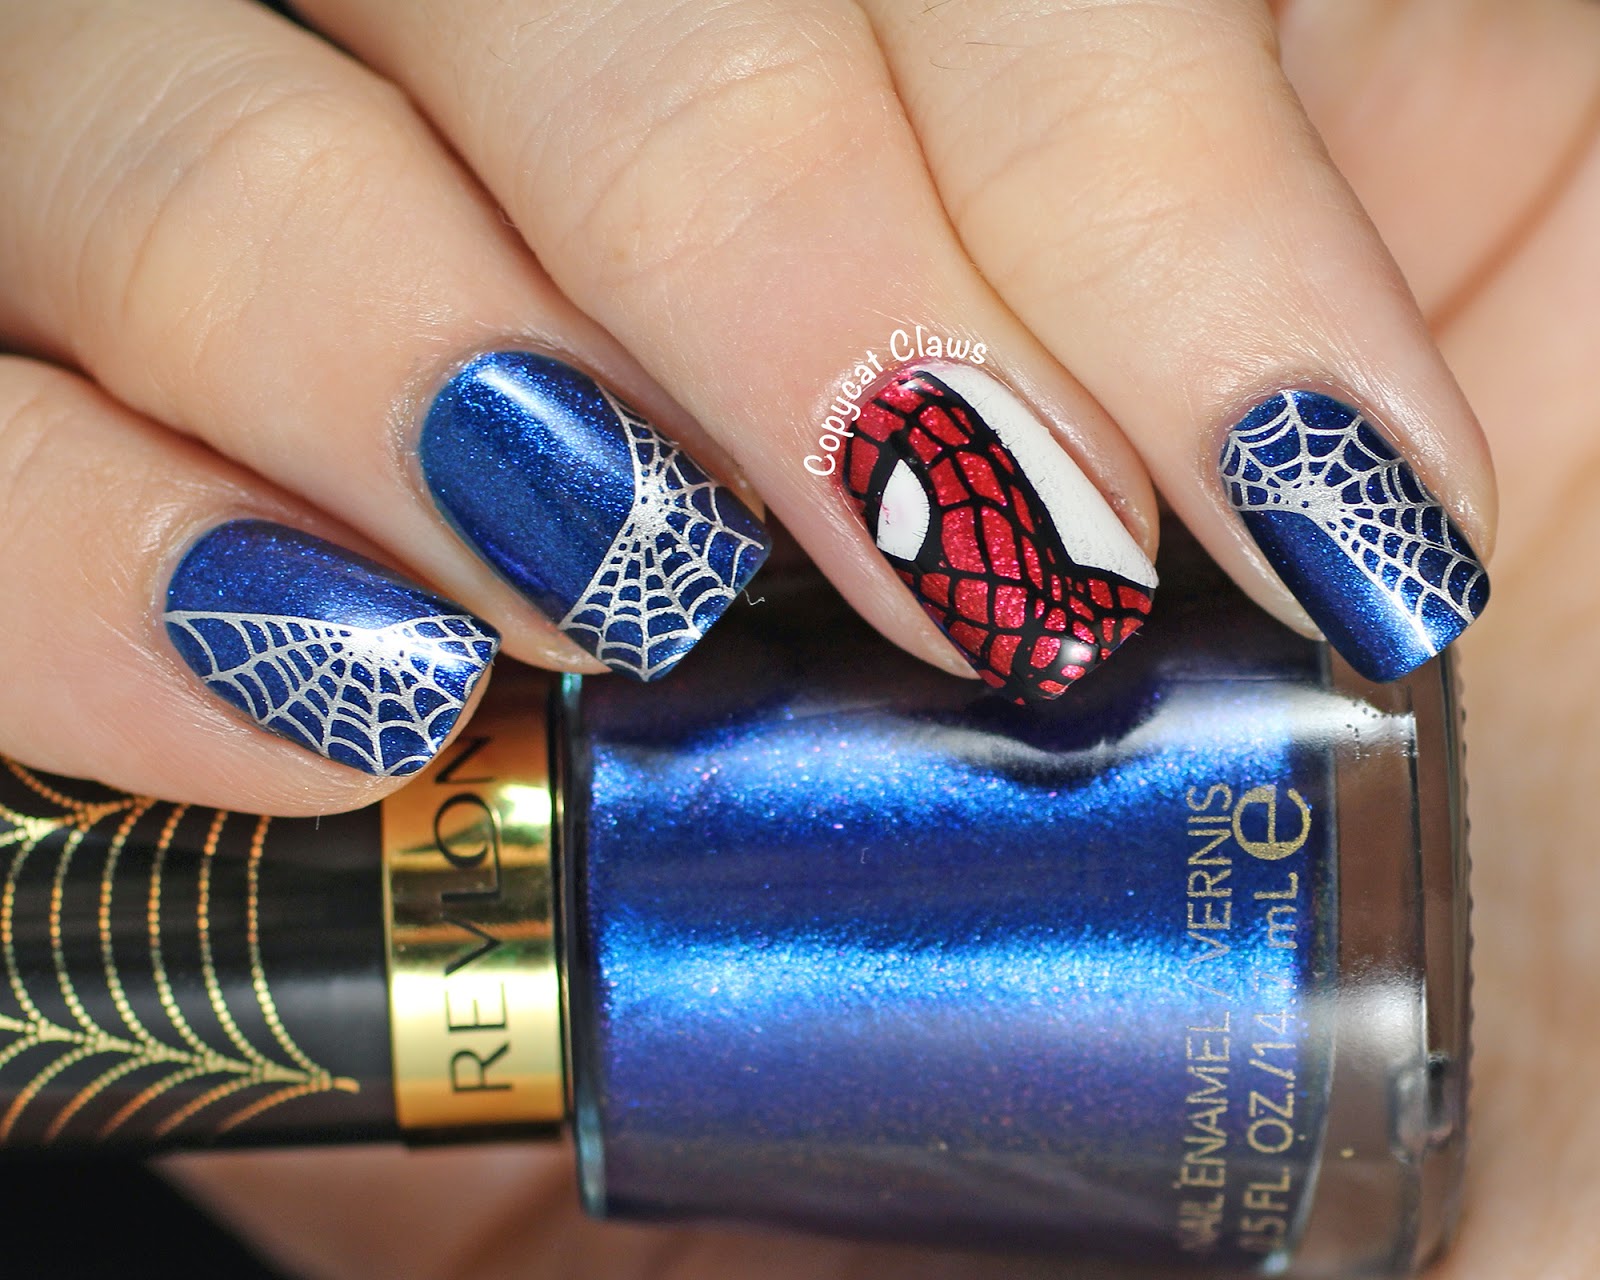 Buy Spider Nail Art Online In India - Etsy India